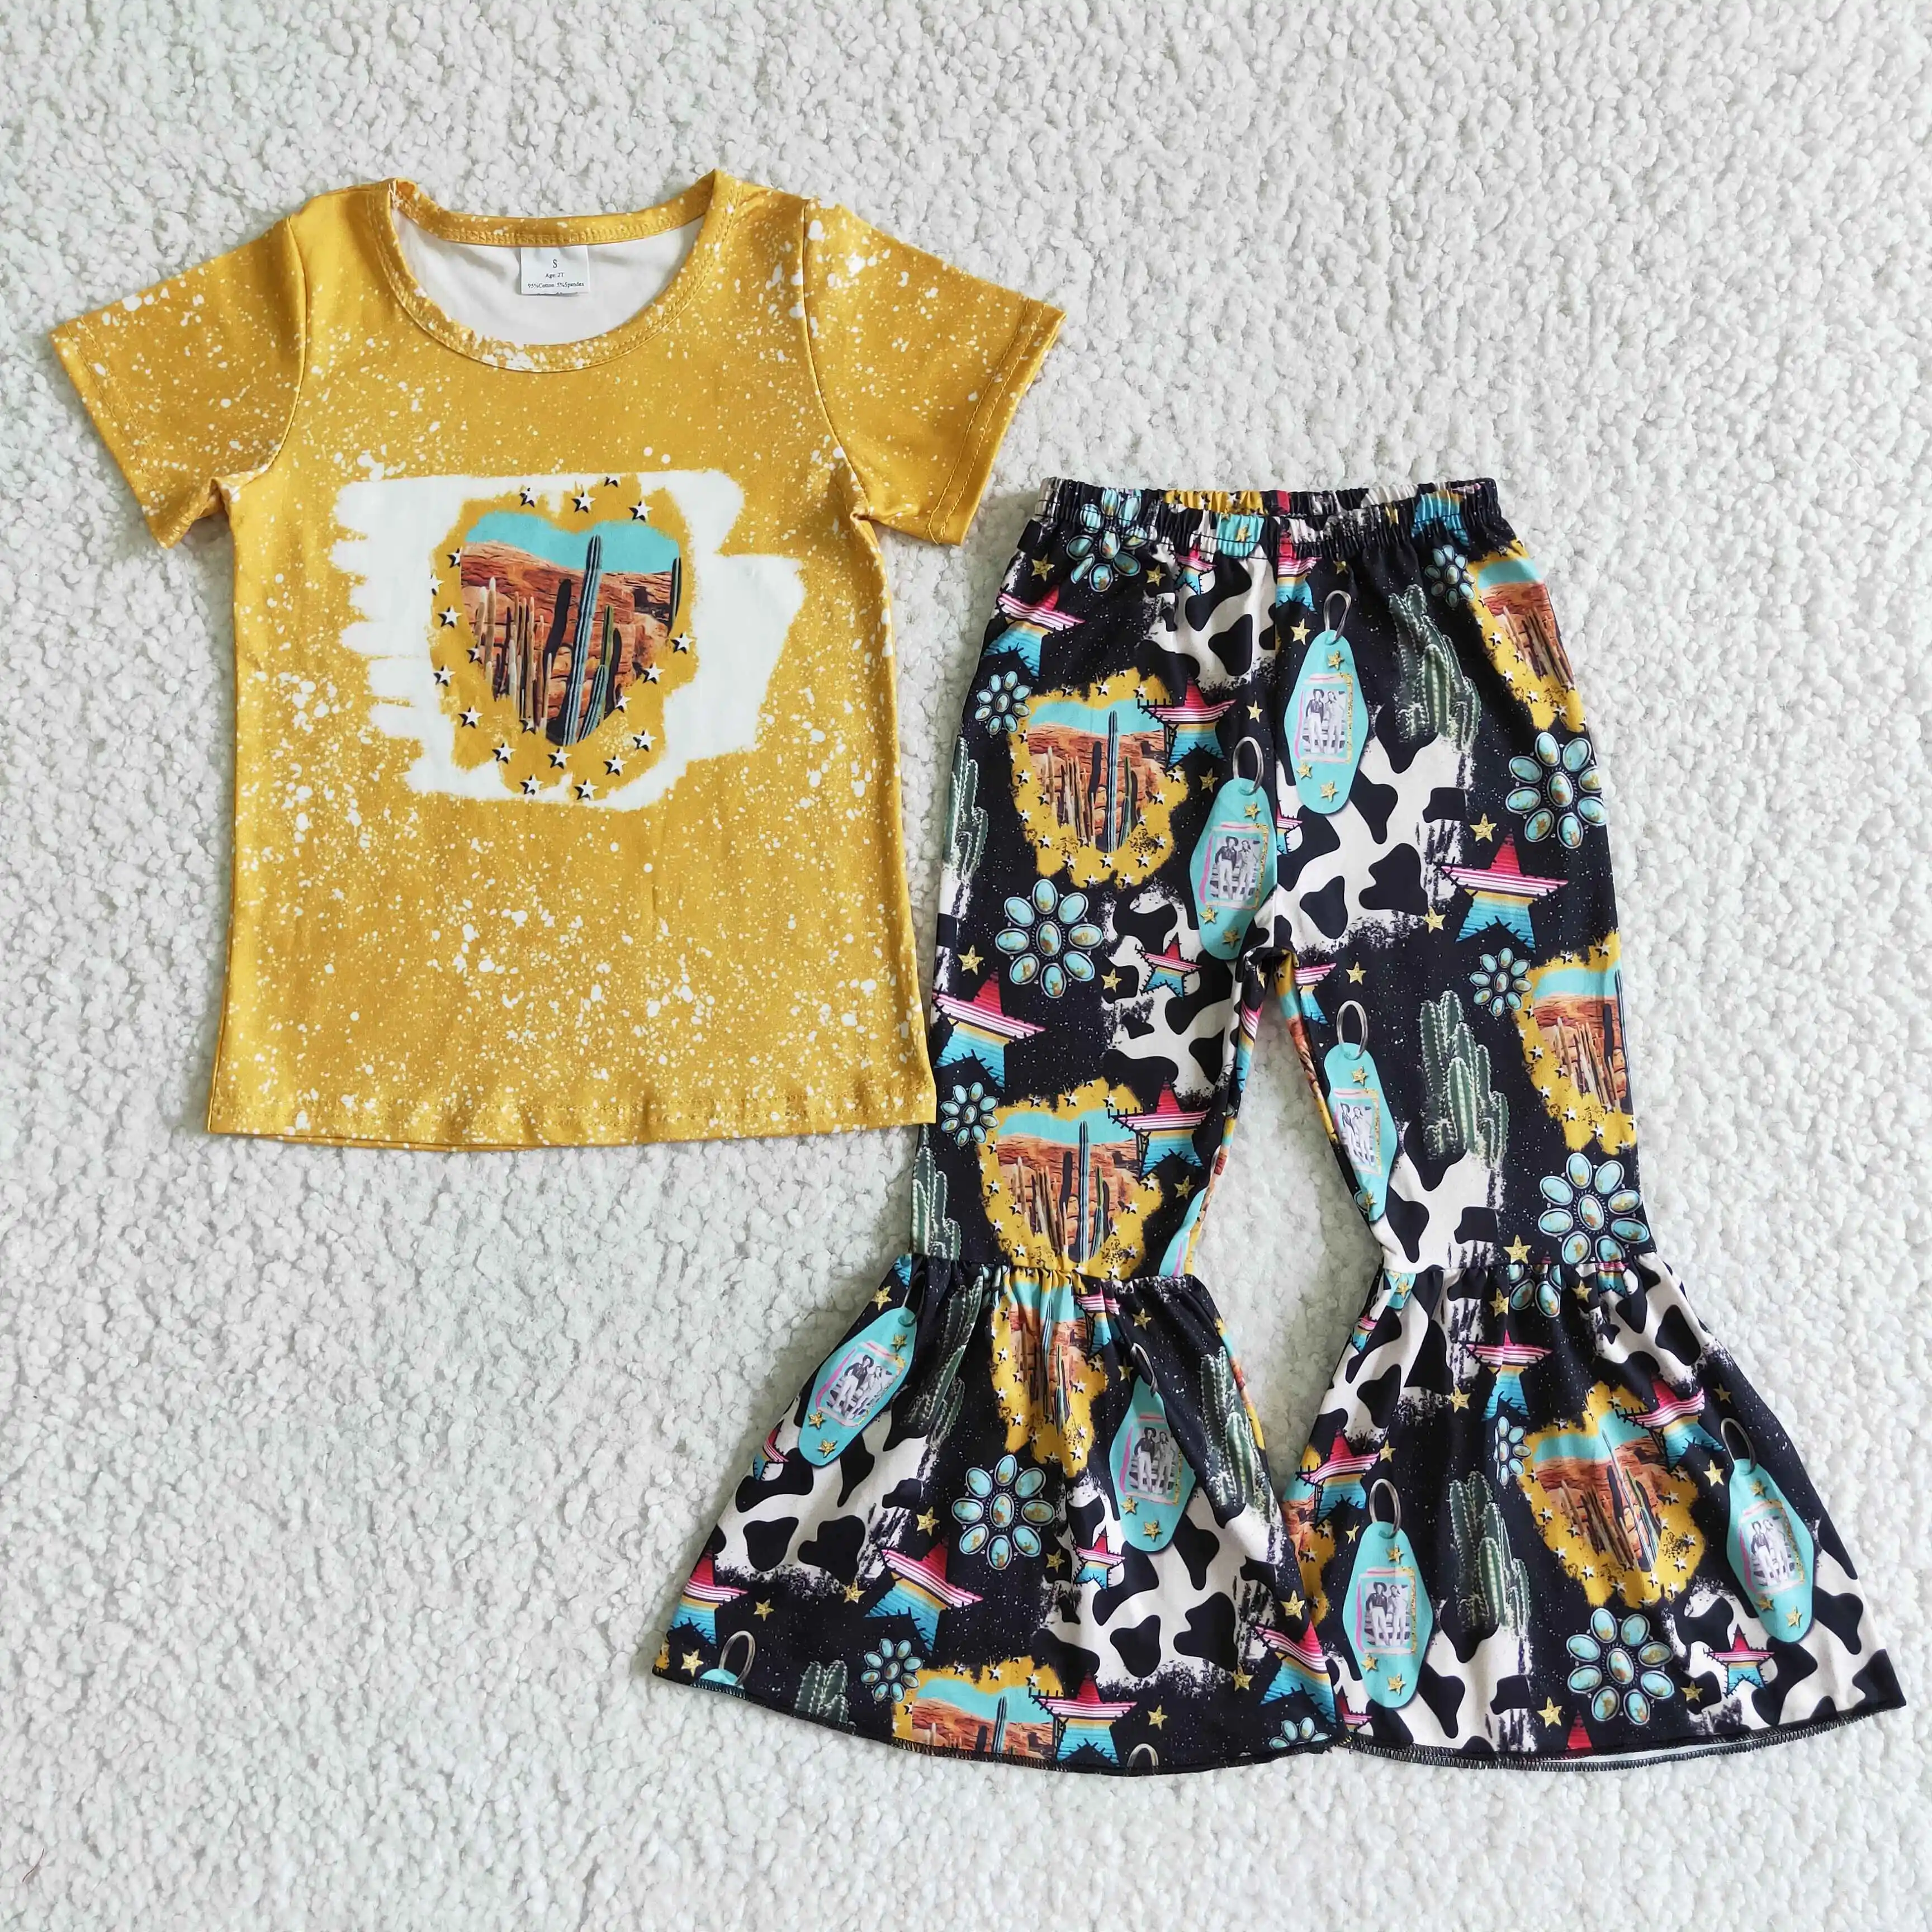 

Western cowgirl cactus girl's bell bottom pants summer short sleeve yellow bleach t-shirt boutique fashion 2 piece set